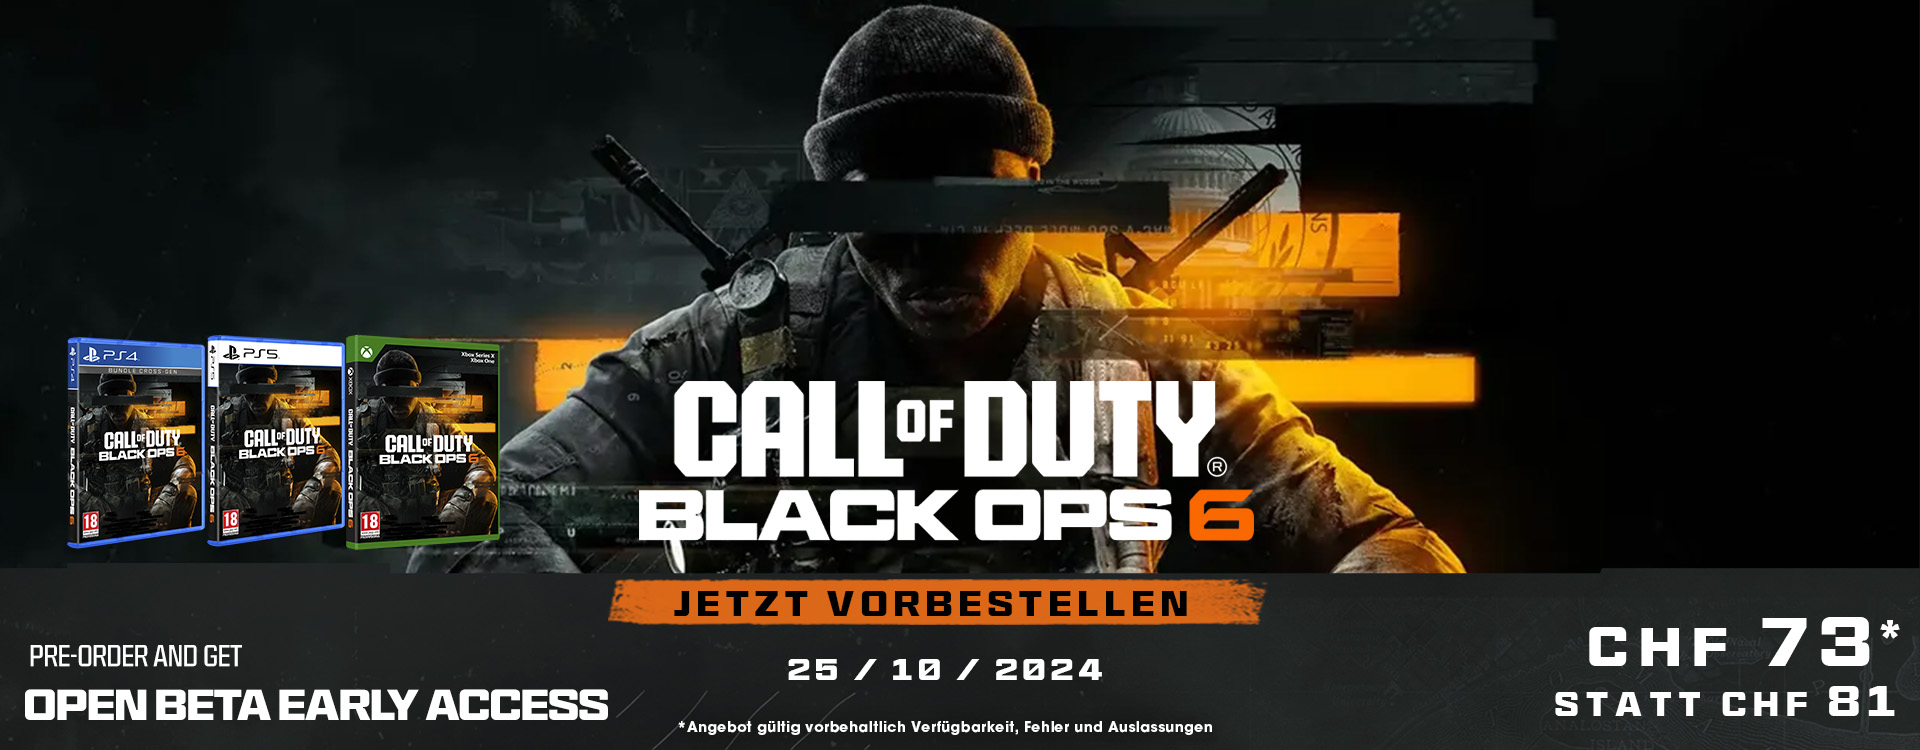 call of duty black ops 6 preorder